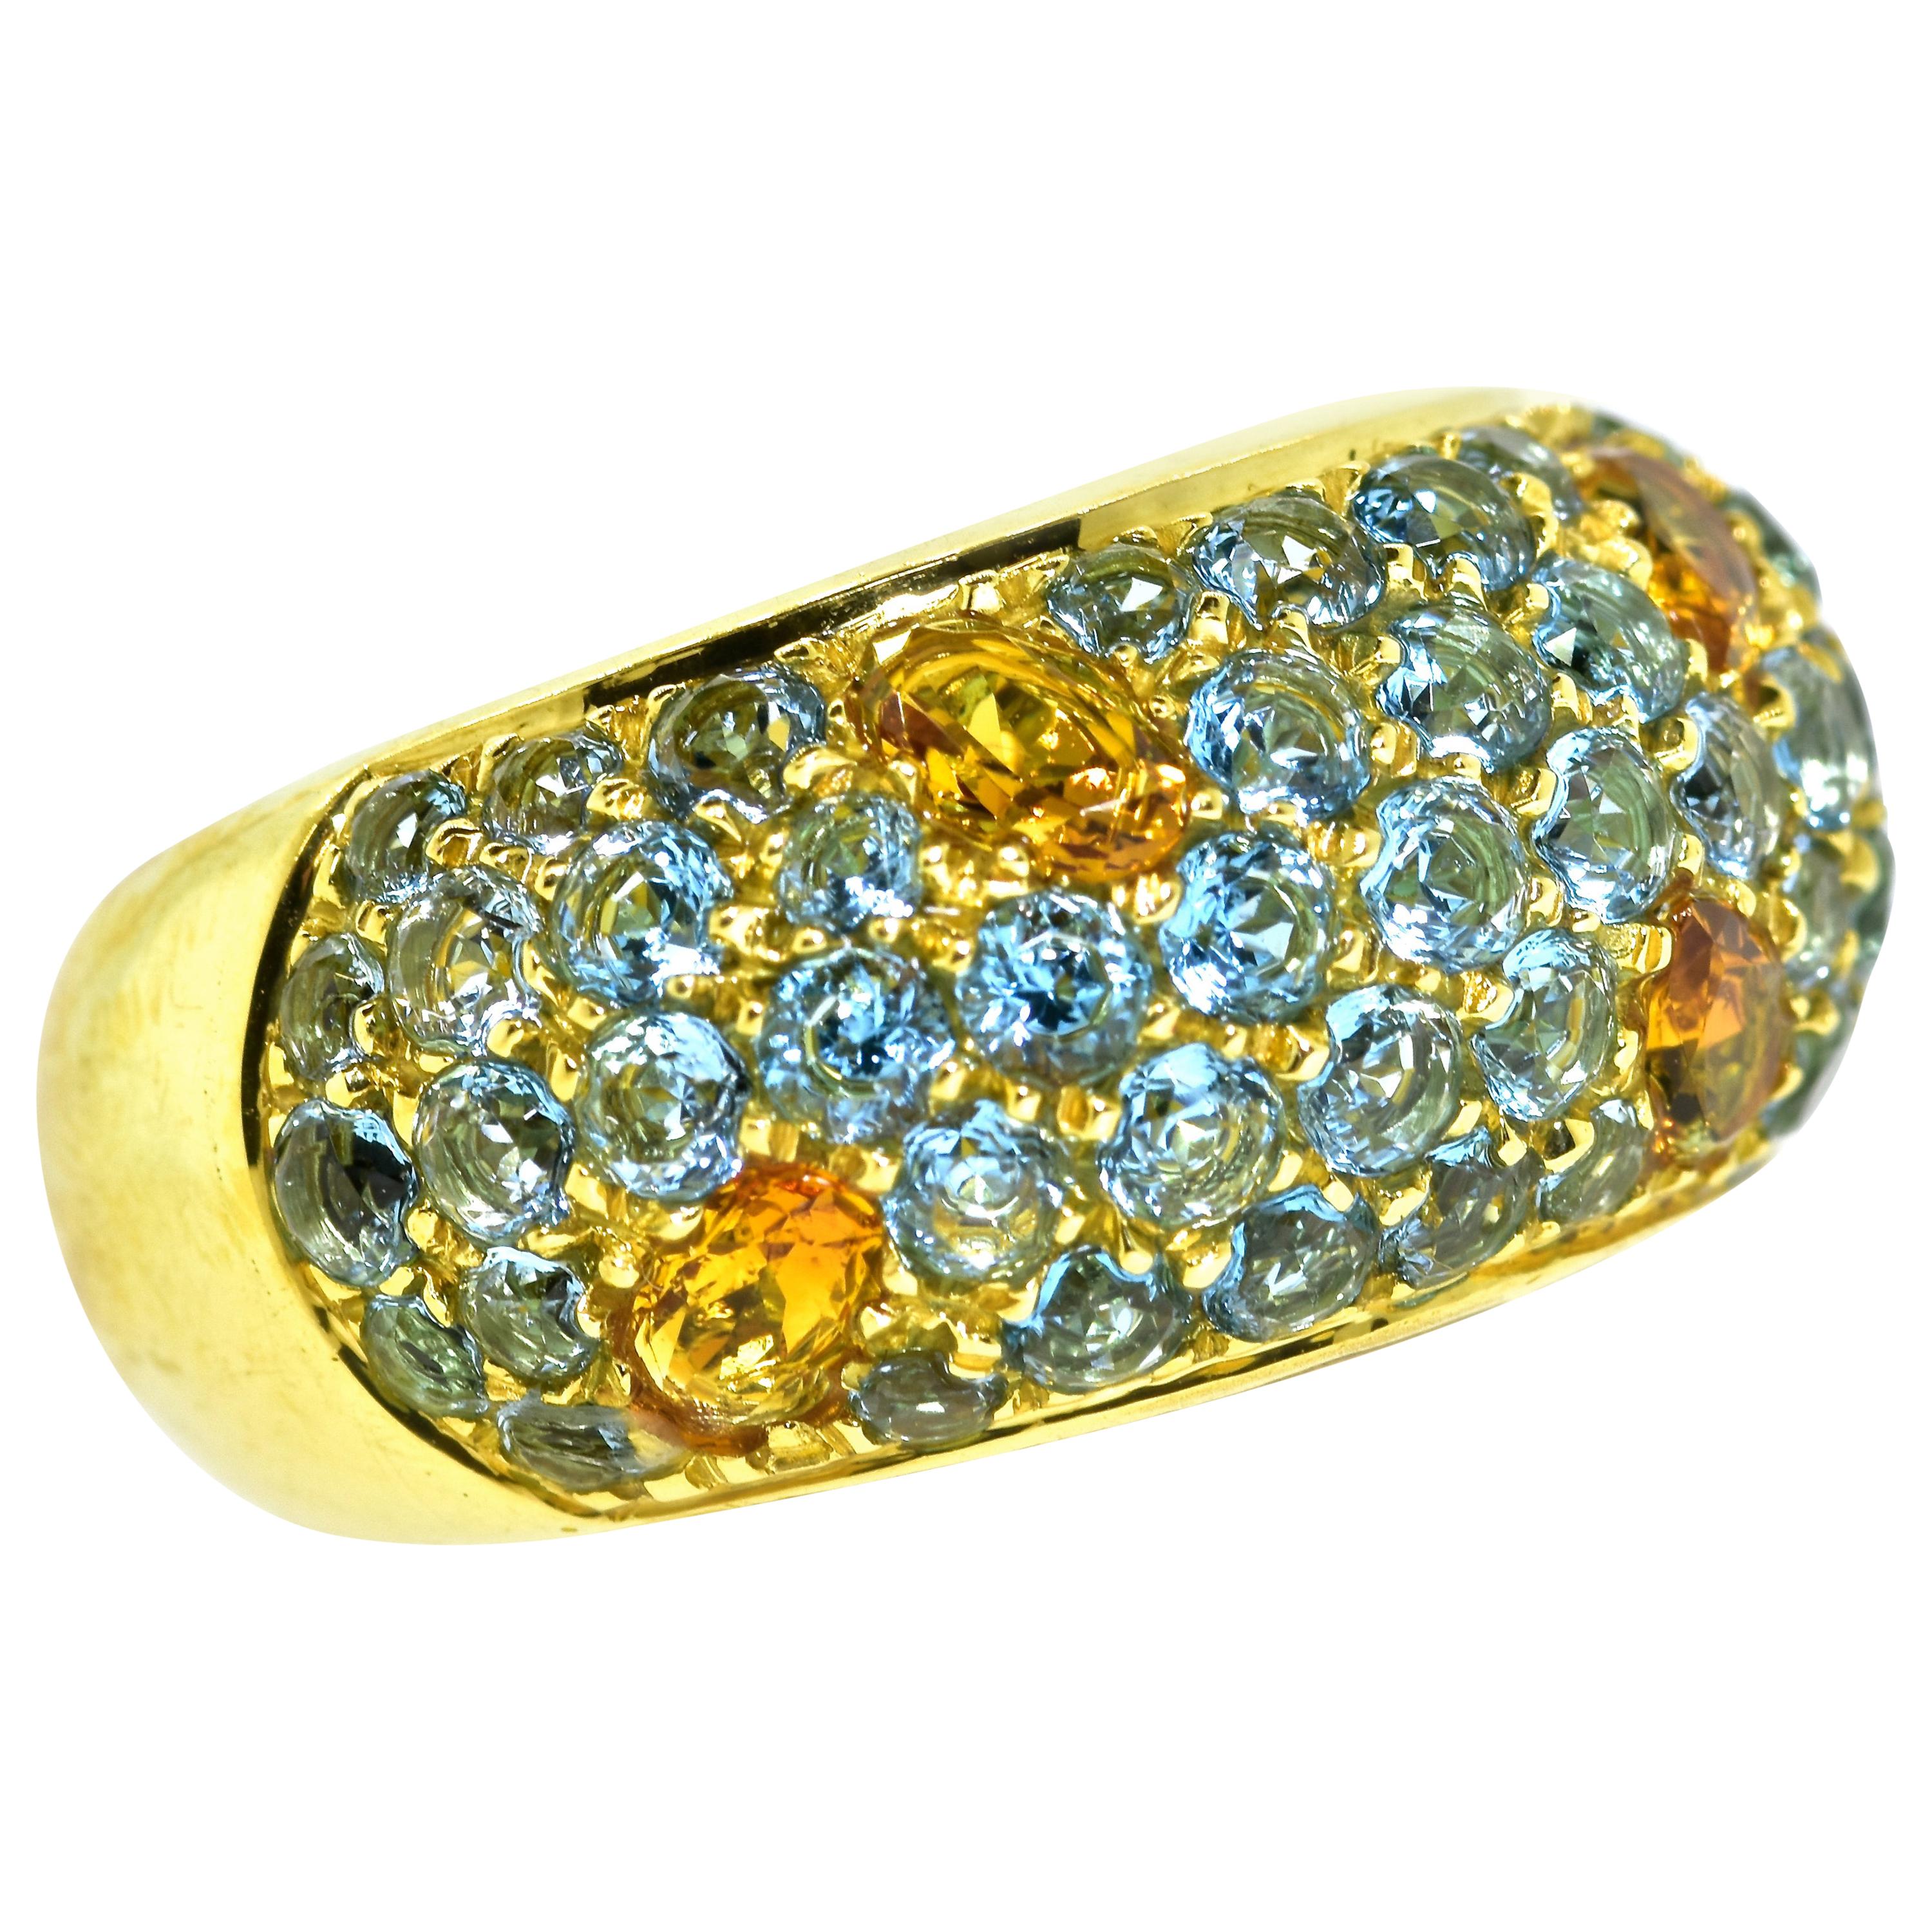 18K yellow gold band measuring 12.21 mm. wide possesses 4 fine oval cut deep orange natural citrine, weighing an estimated 1.5 cts., and  set within a bed of 50 round natural round brilliant cut blue topaz weighing and estimated 4.5 cts.  All of the